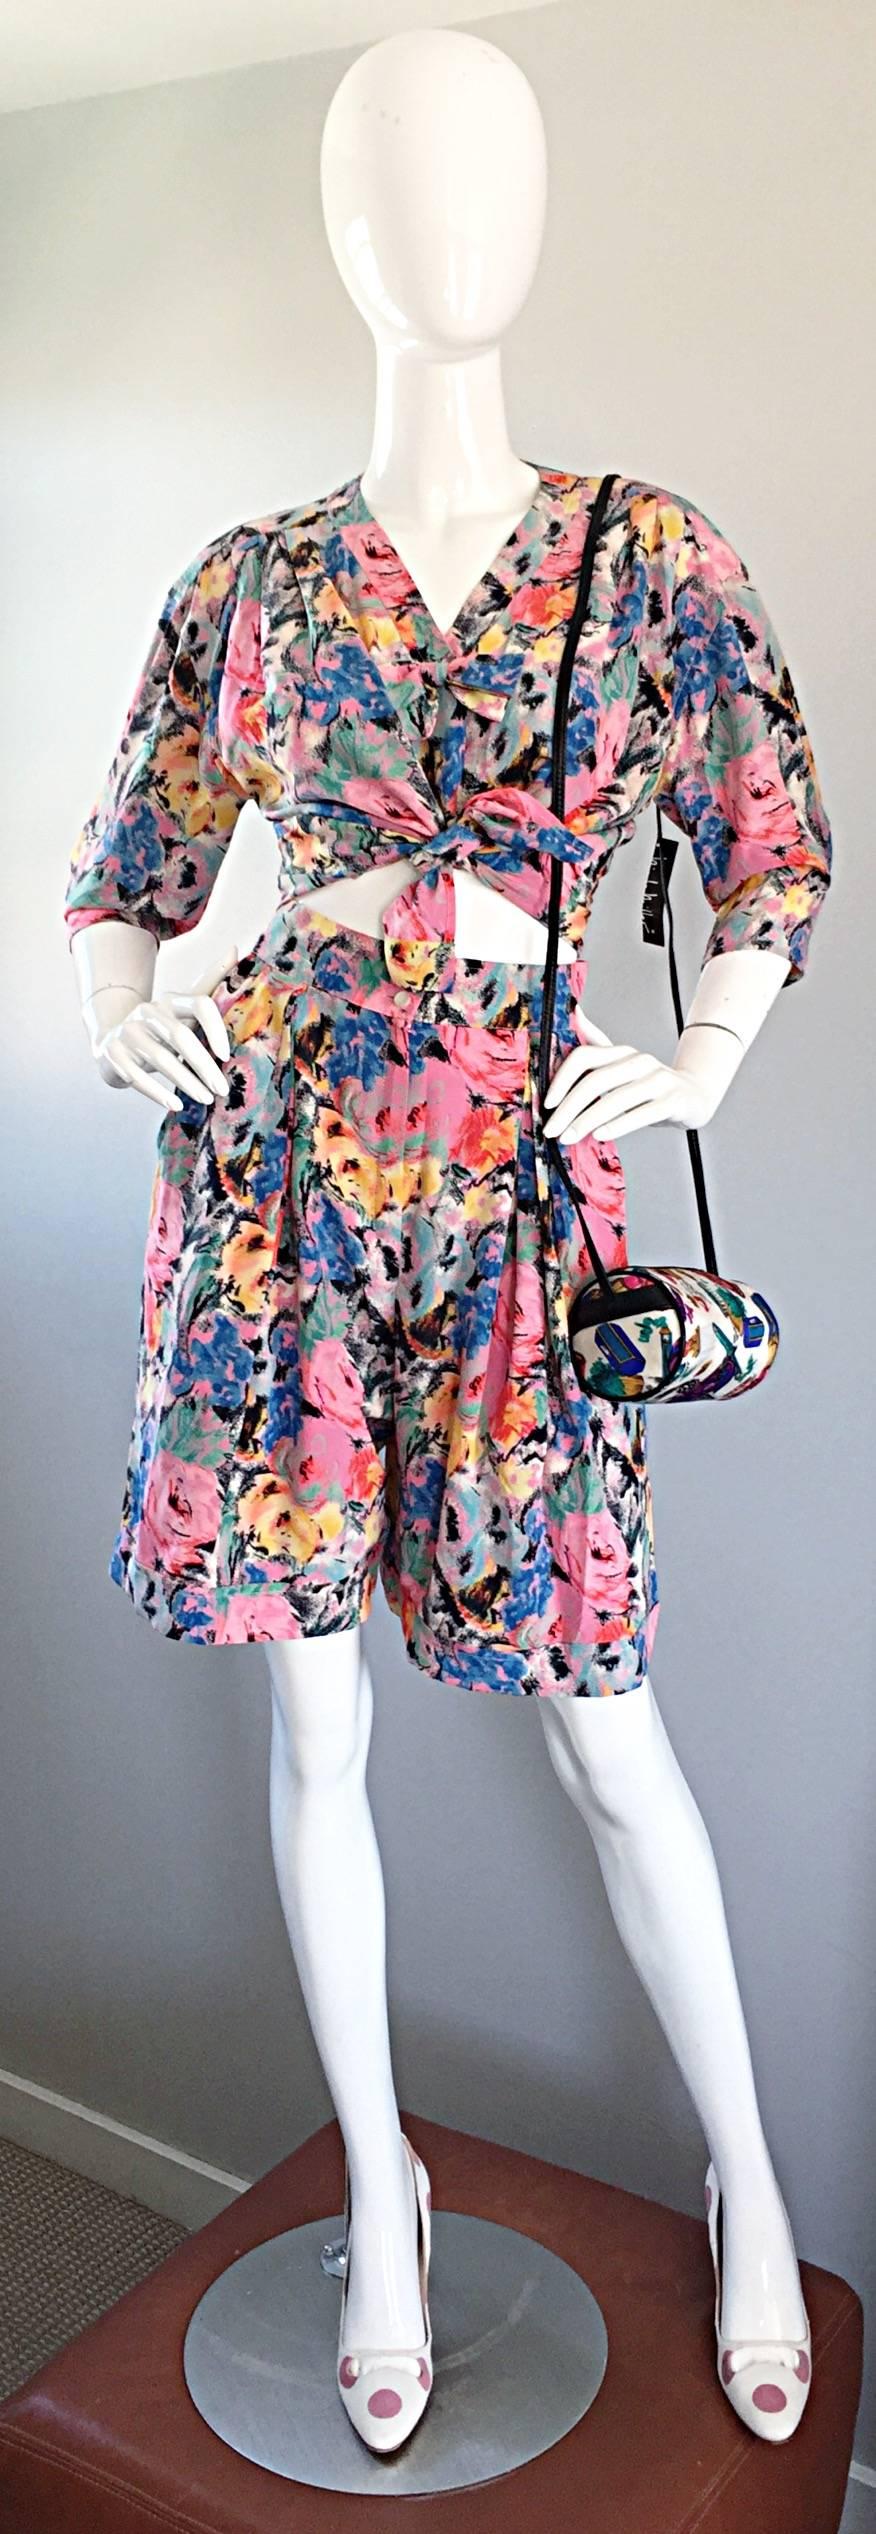 Insanely fabulous and chic vintage EMANUEL UNGARO silk top and shorts suit set! Beautiful pastel watercolor print of florals in pink, blue, green, yellow, black, and white throughout. Adorable bow snaps shut above the bust. Buttons up the bodice,